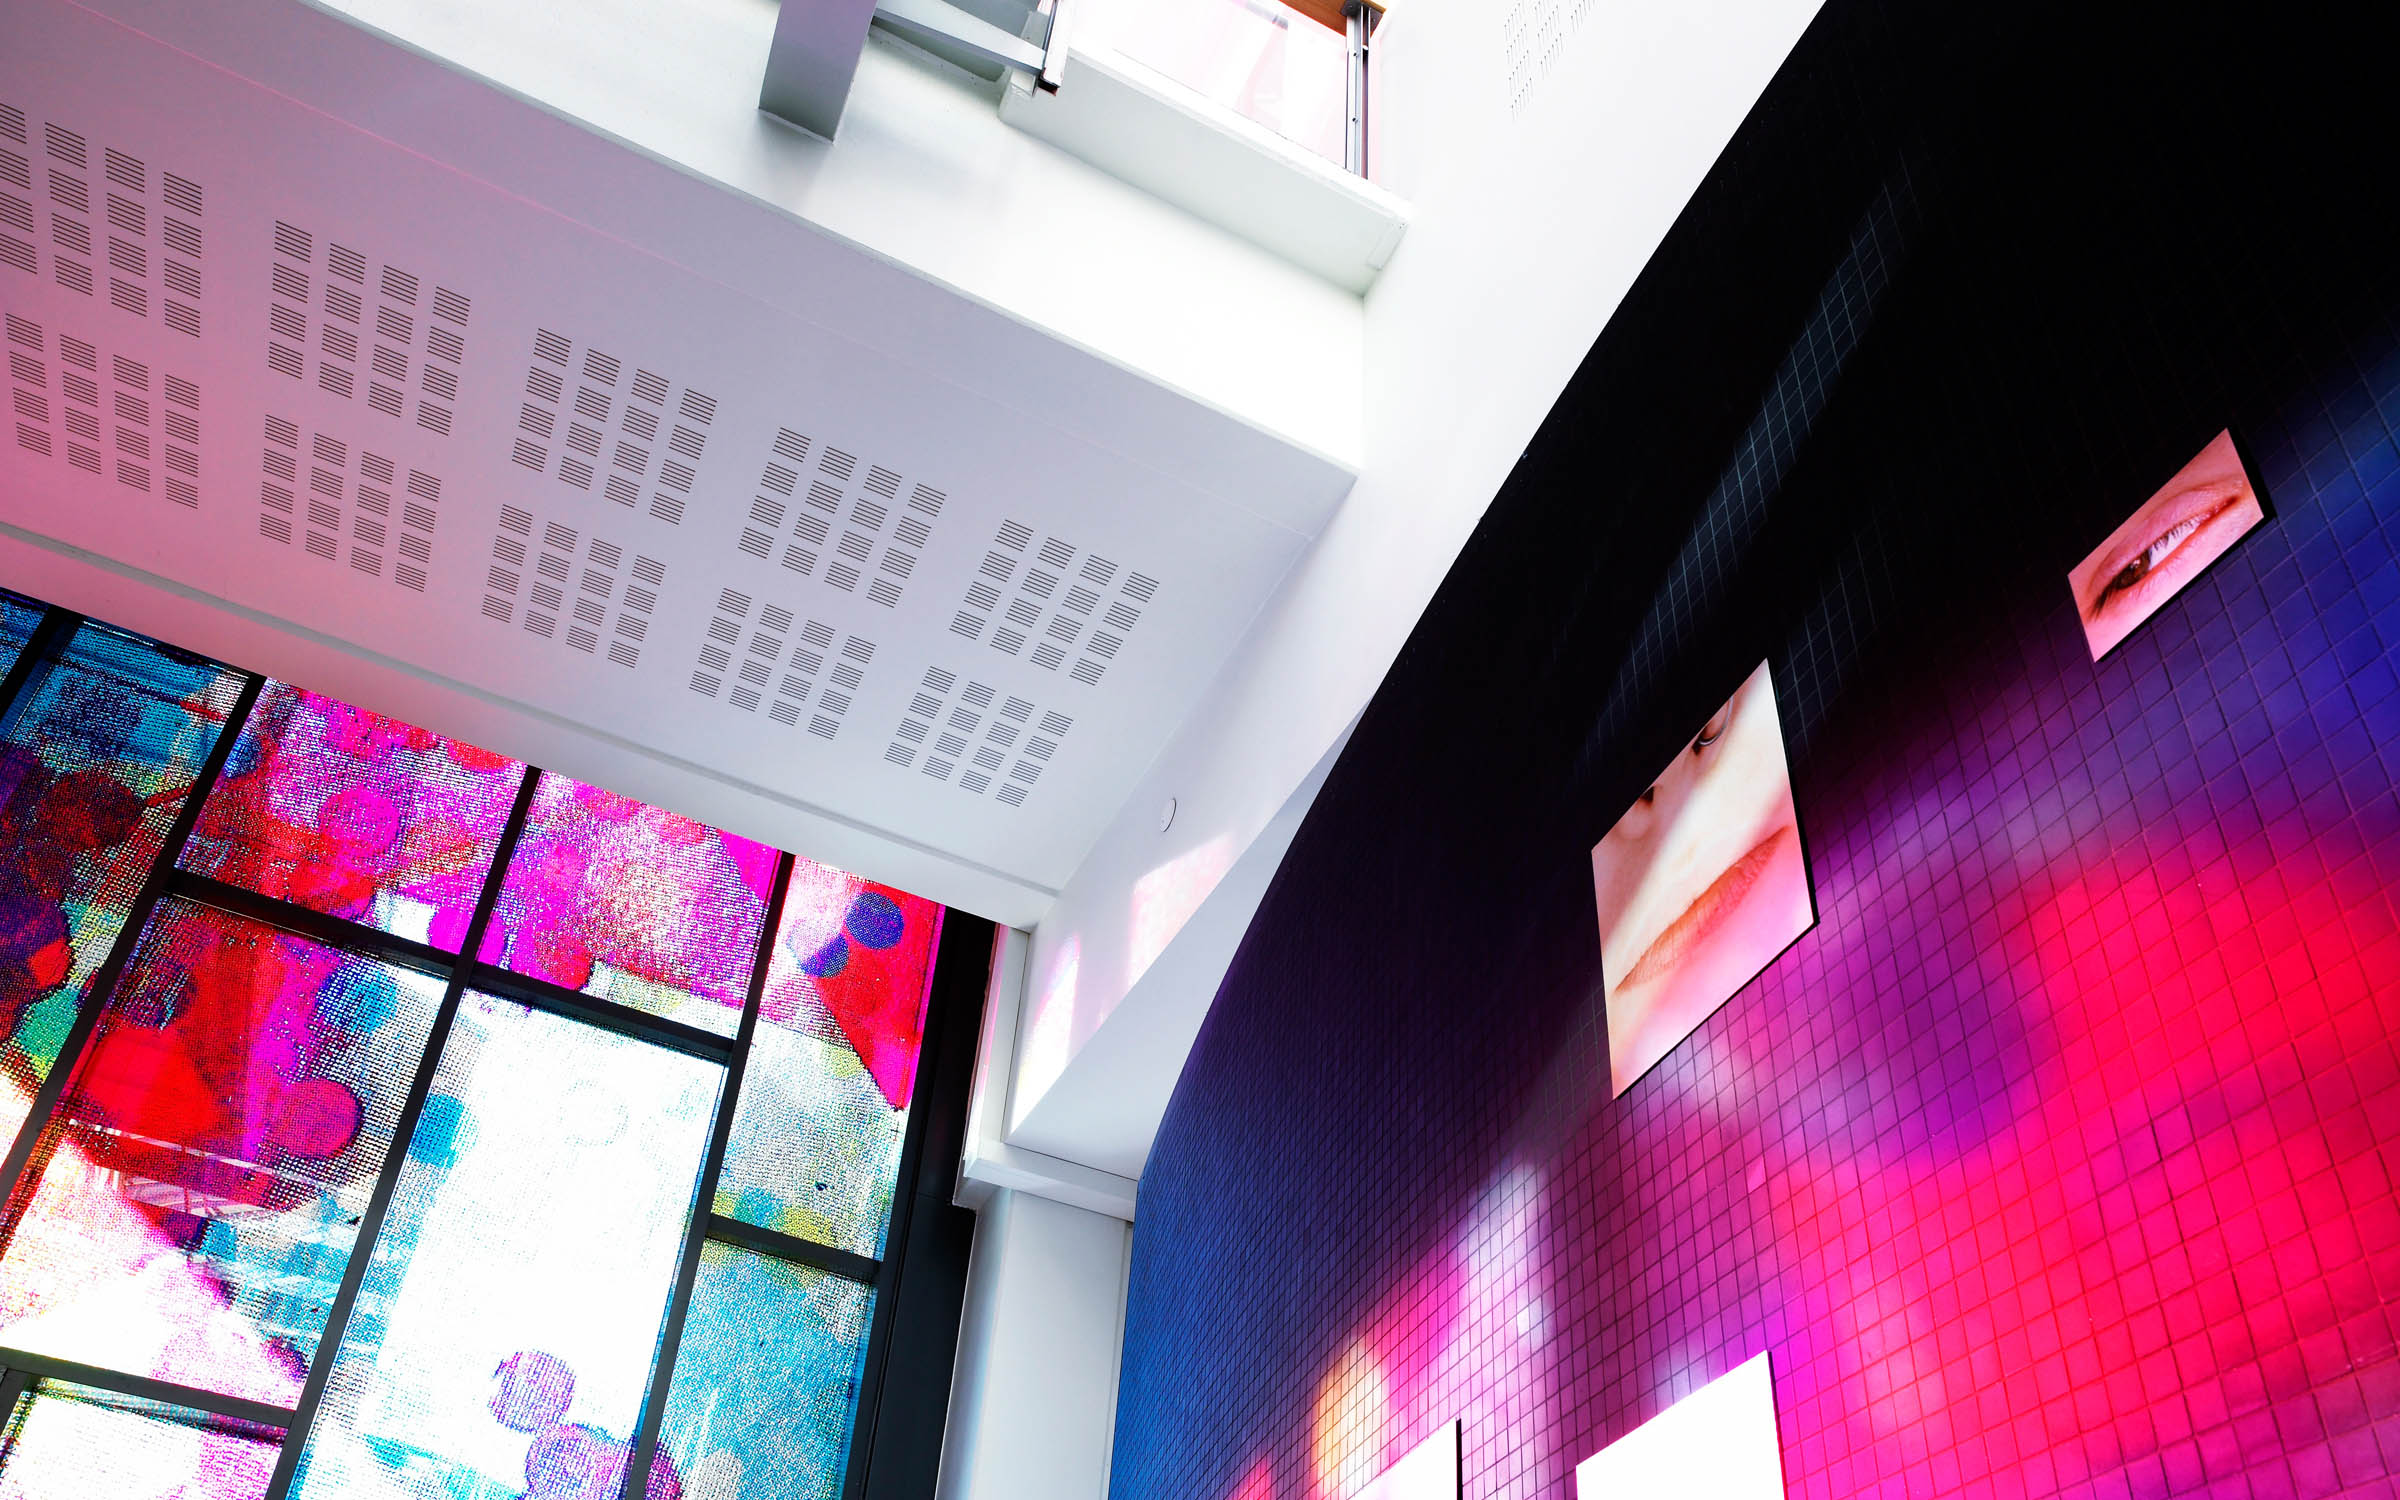 Acoustic panels on walls and ceilings with bright coloured designs